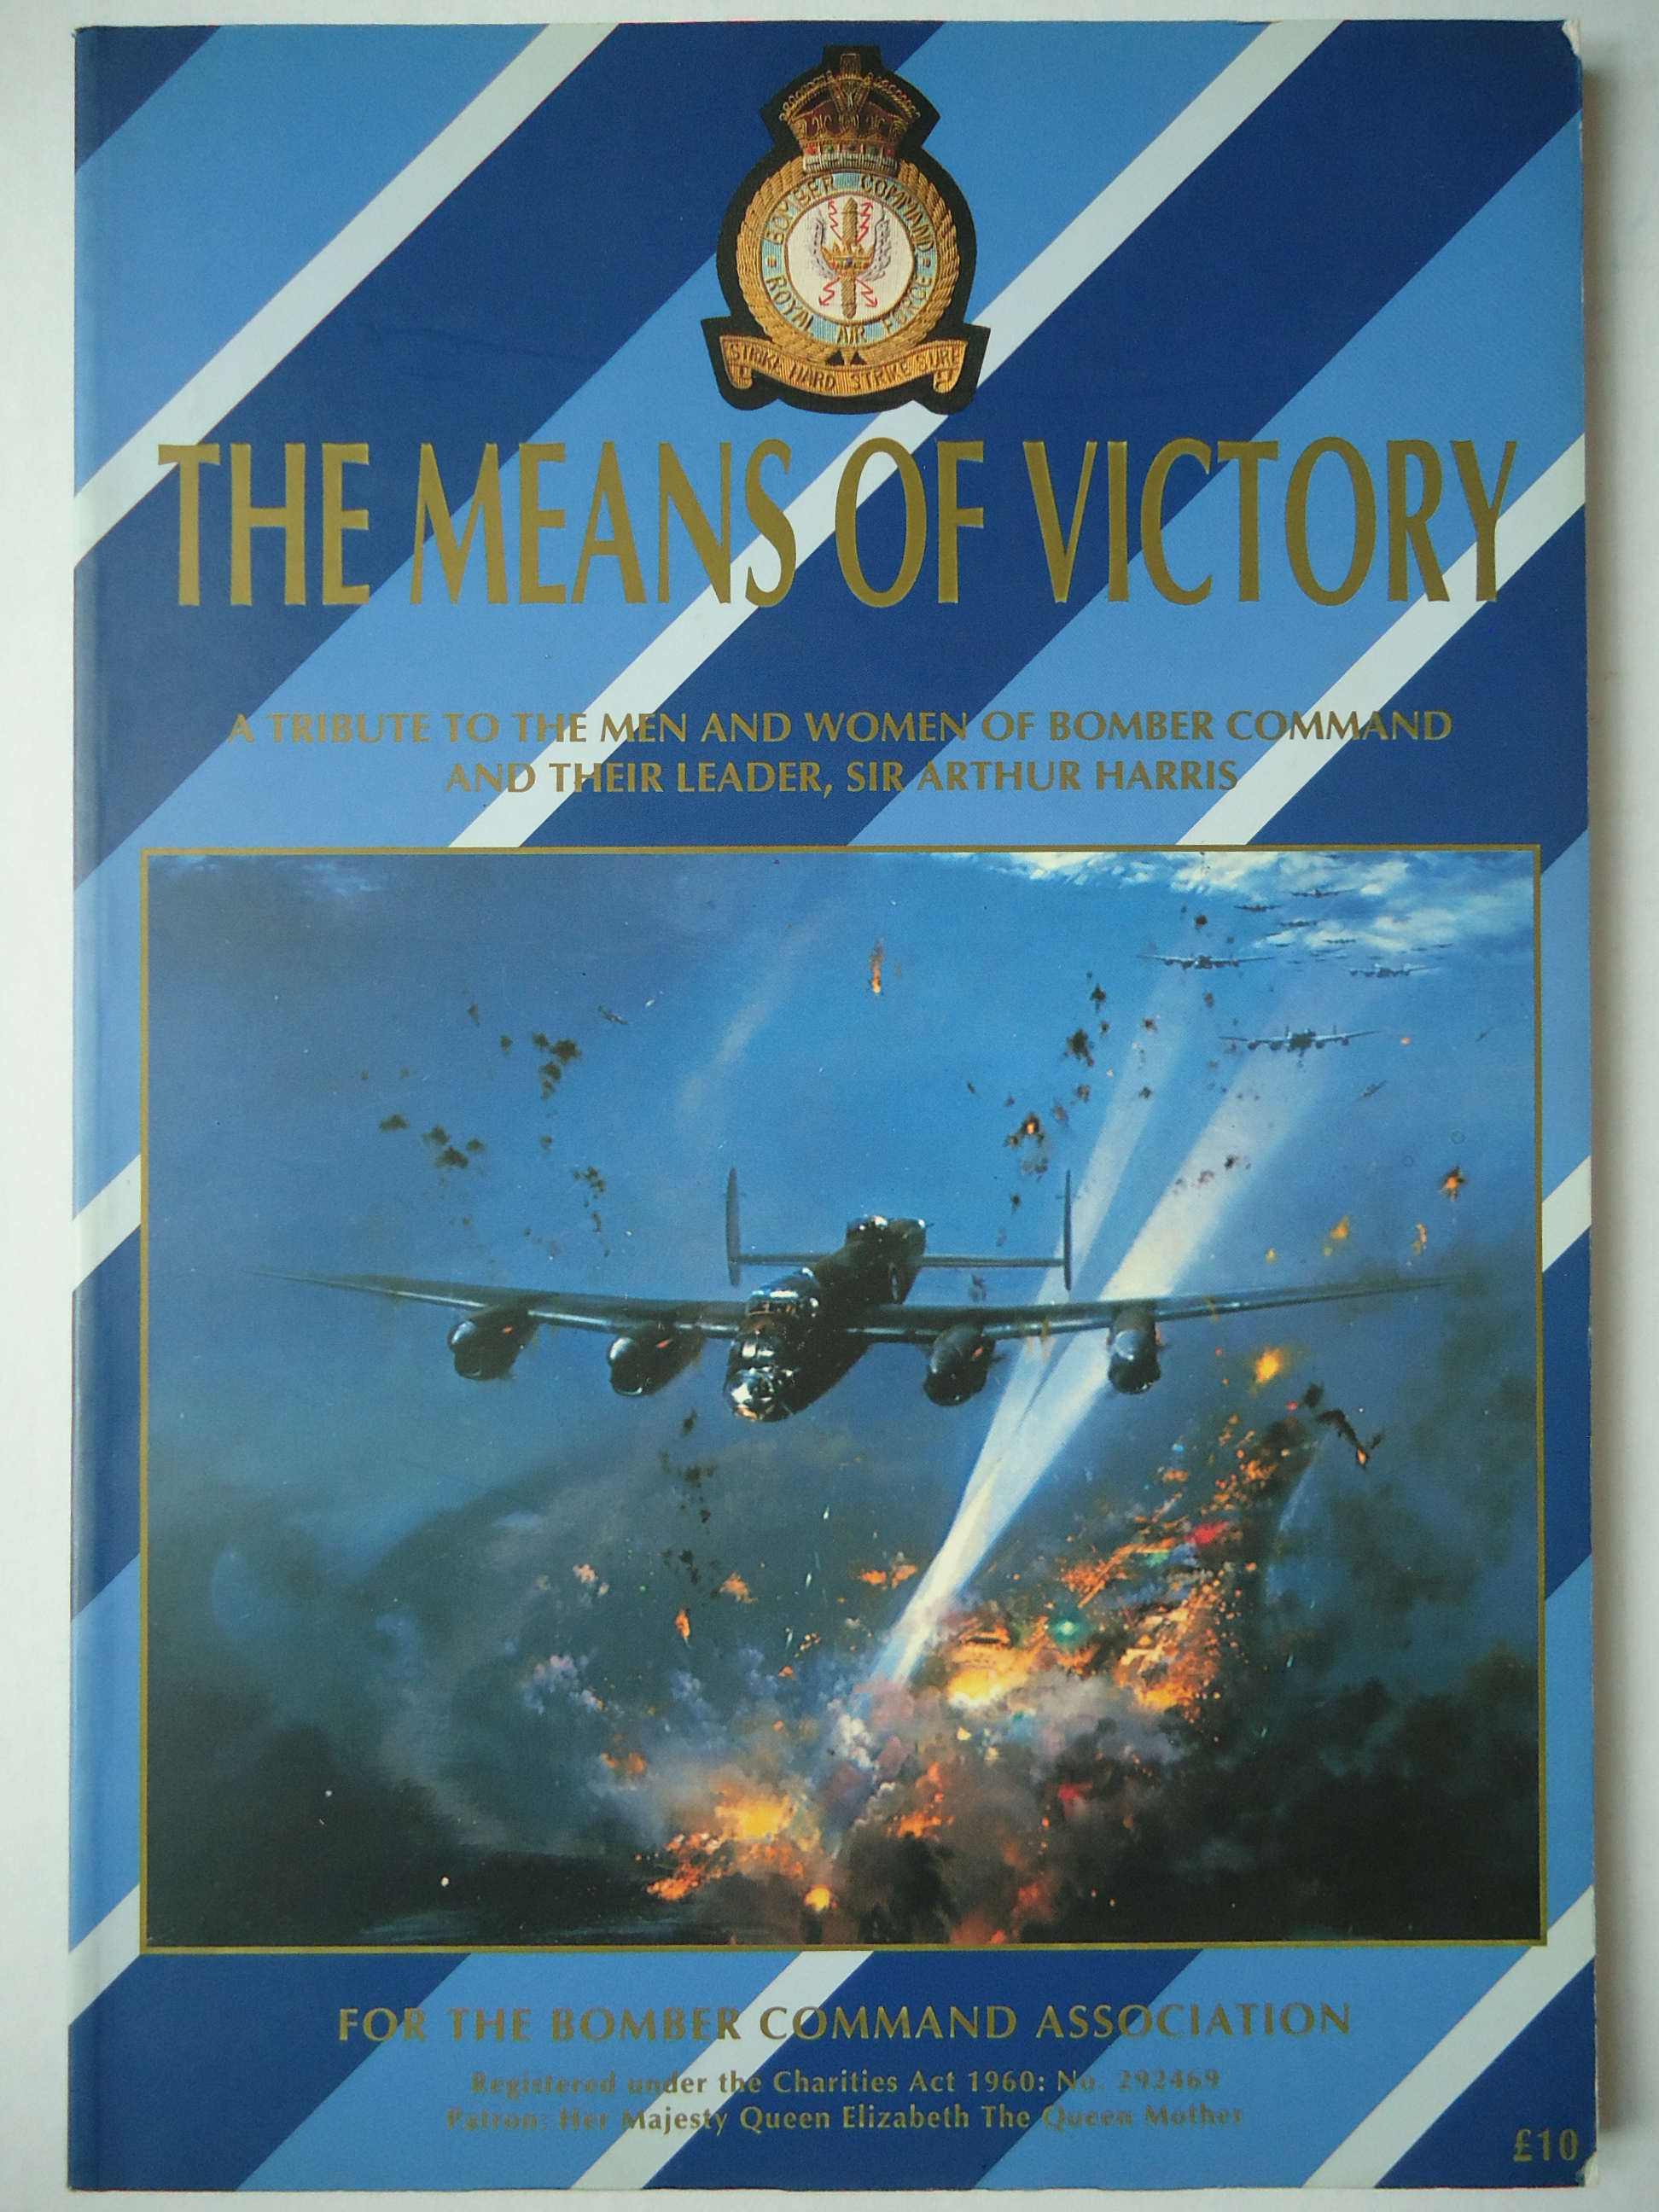 THE MEANS OF VICTORY. A Tribute to the Men and Women of Bomber Command and their Leader, Sir Arthur Harris - White, Stanley, (editor)